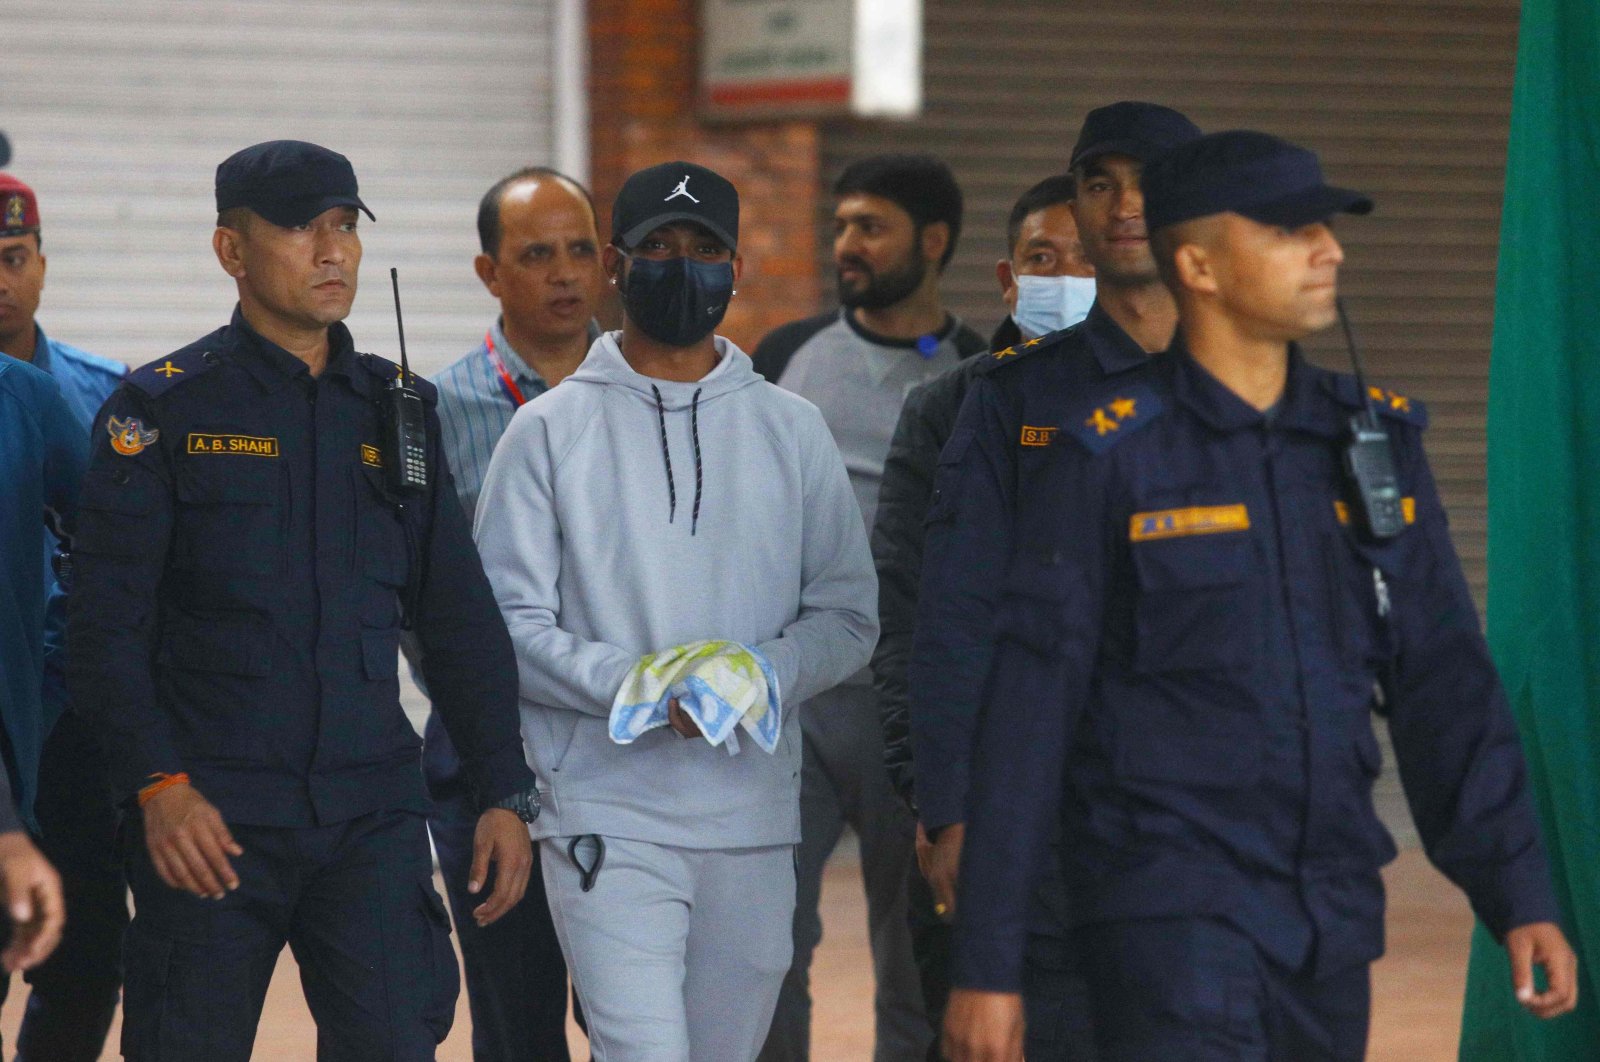 Nepali cricketer Sandeep Lamichhane (C) is escorted by police after being taken into custody to face rape charges, at Tribhuvan international airport in Kathmandu, Nepal, Oct. 6, (AFP Photo)